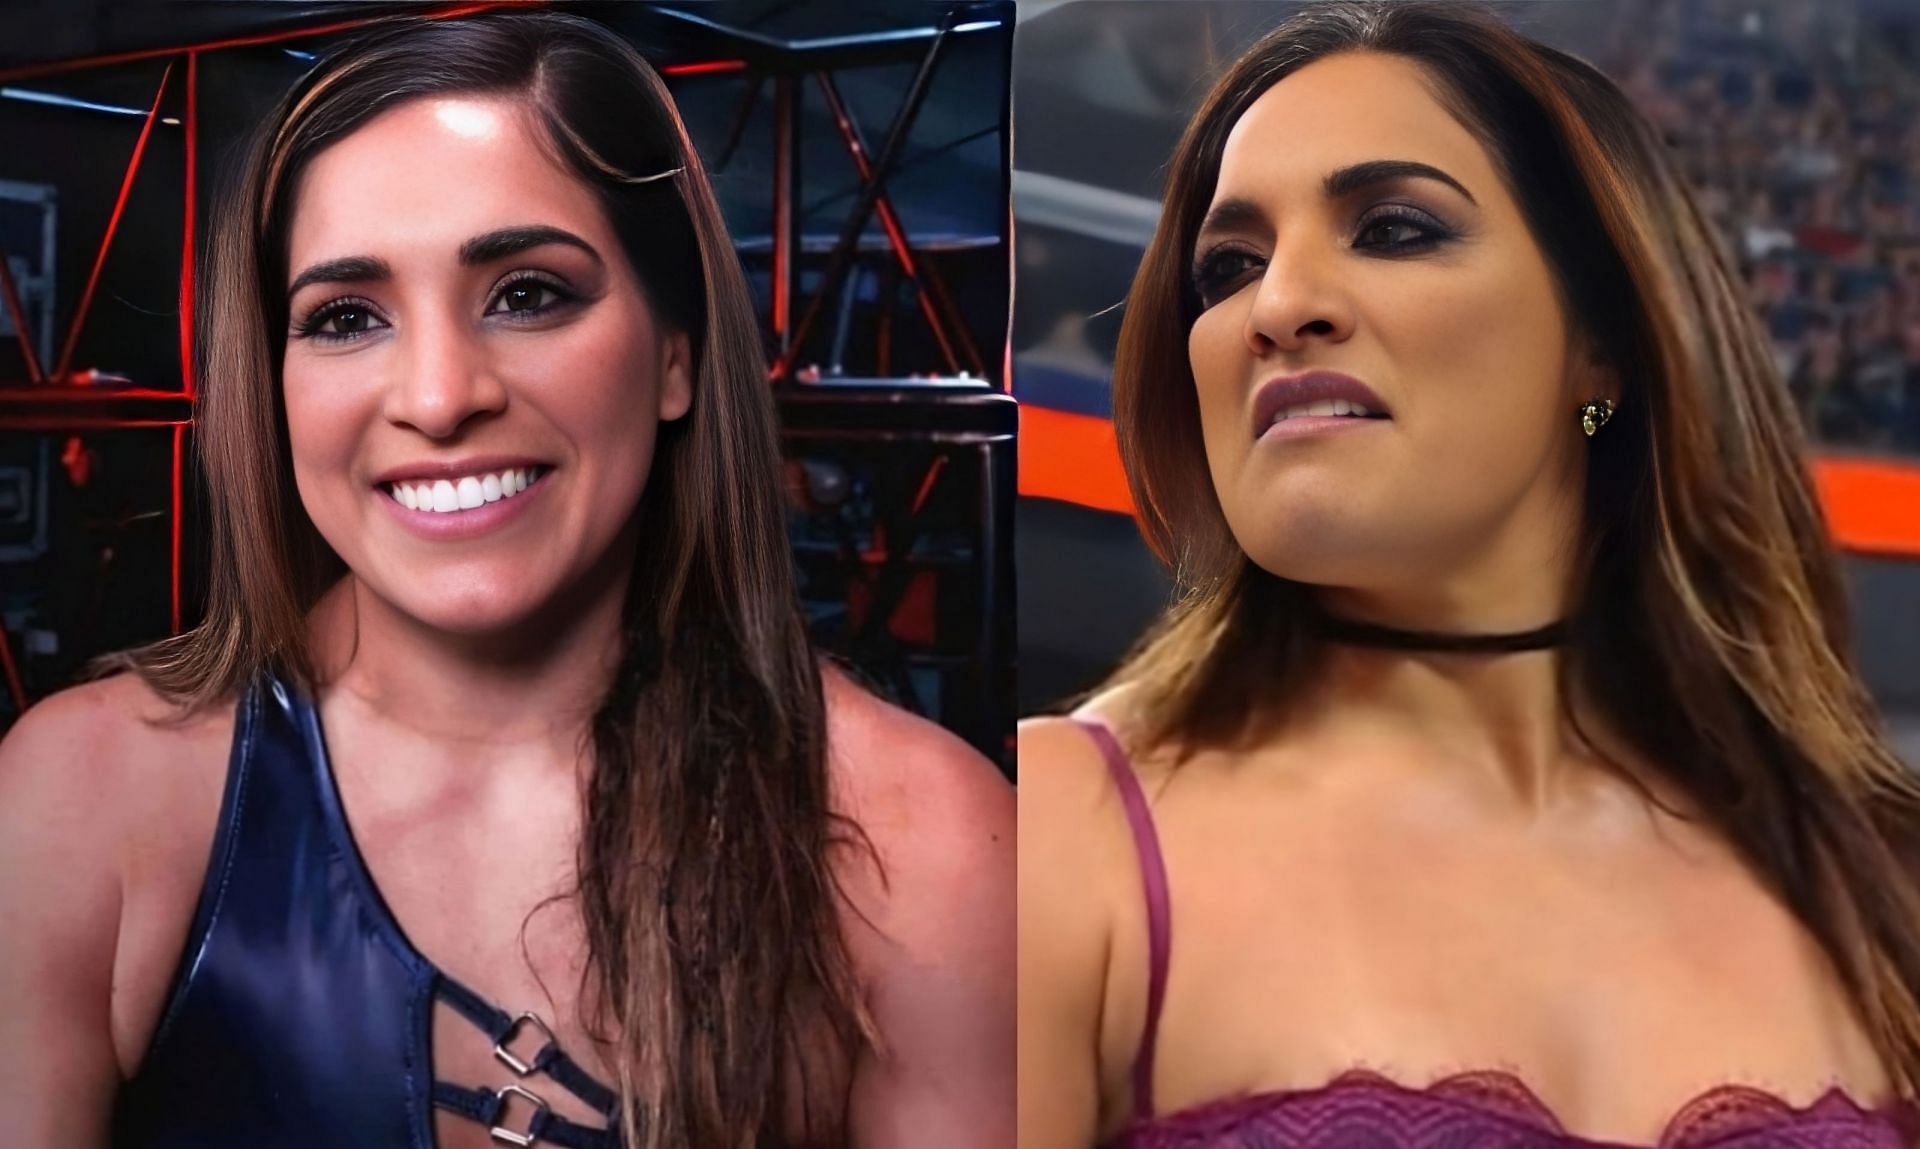 Rodriguez is a former 3-time WWE Women